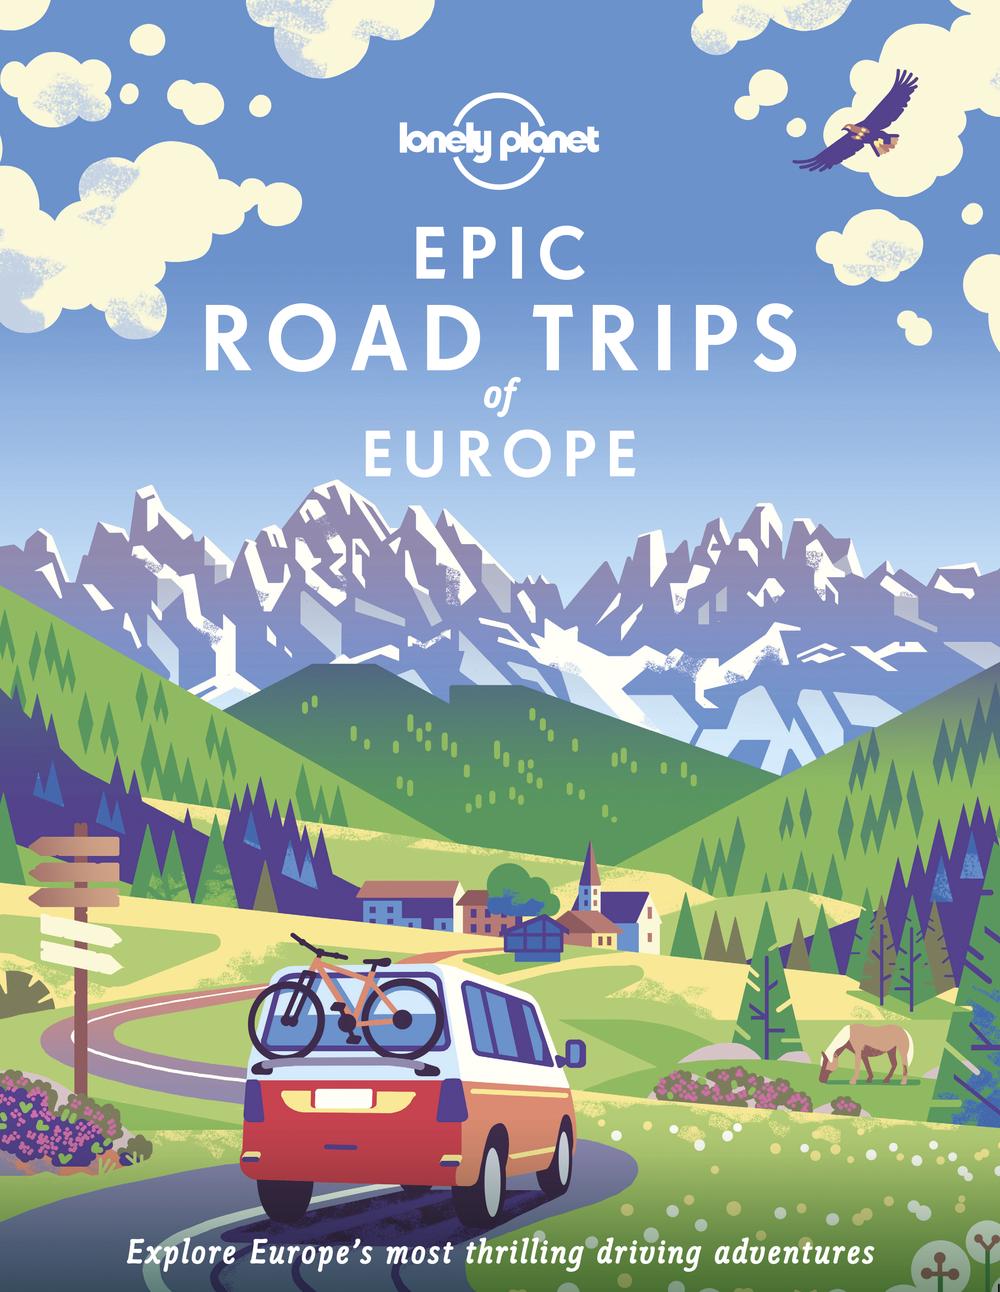 online　Lonely　The　Europe　by　Trips　9781838695095　at　Planet　Lonely　Nile　Hardcover,　Planet,　Epic　of　Road　Buy